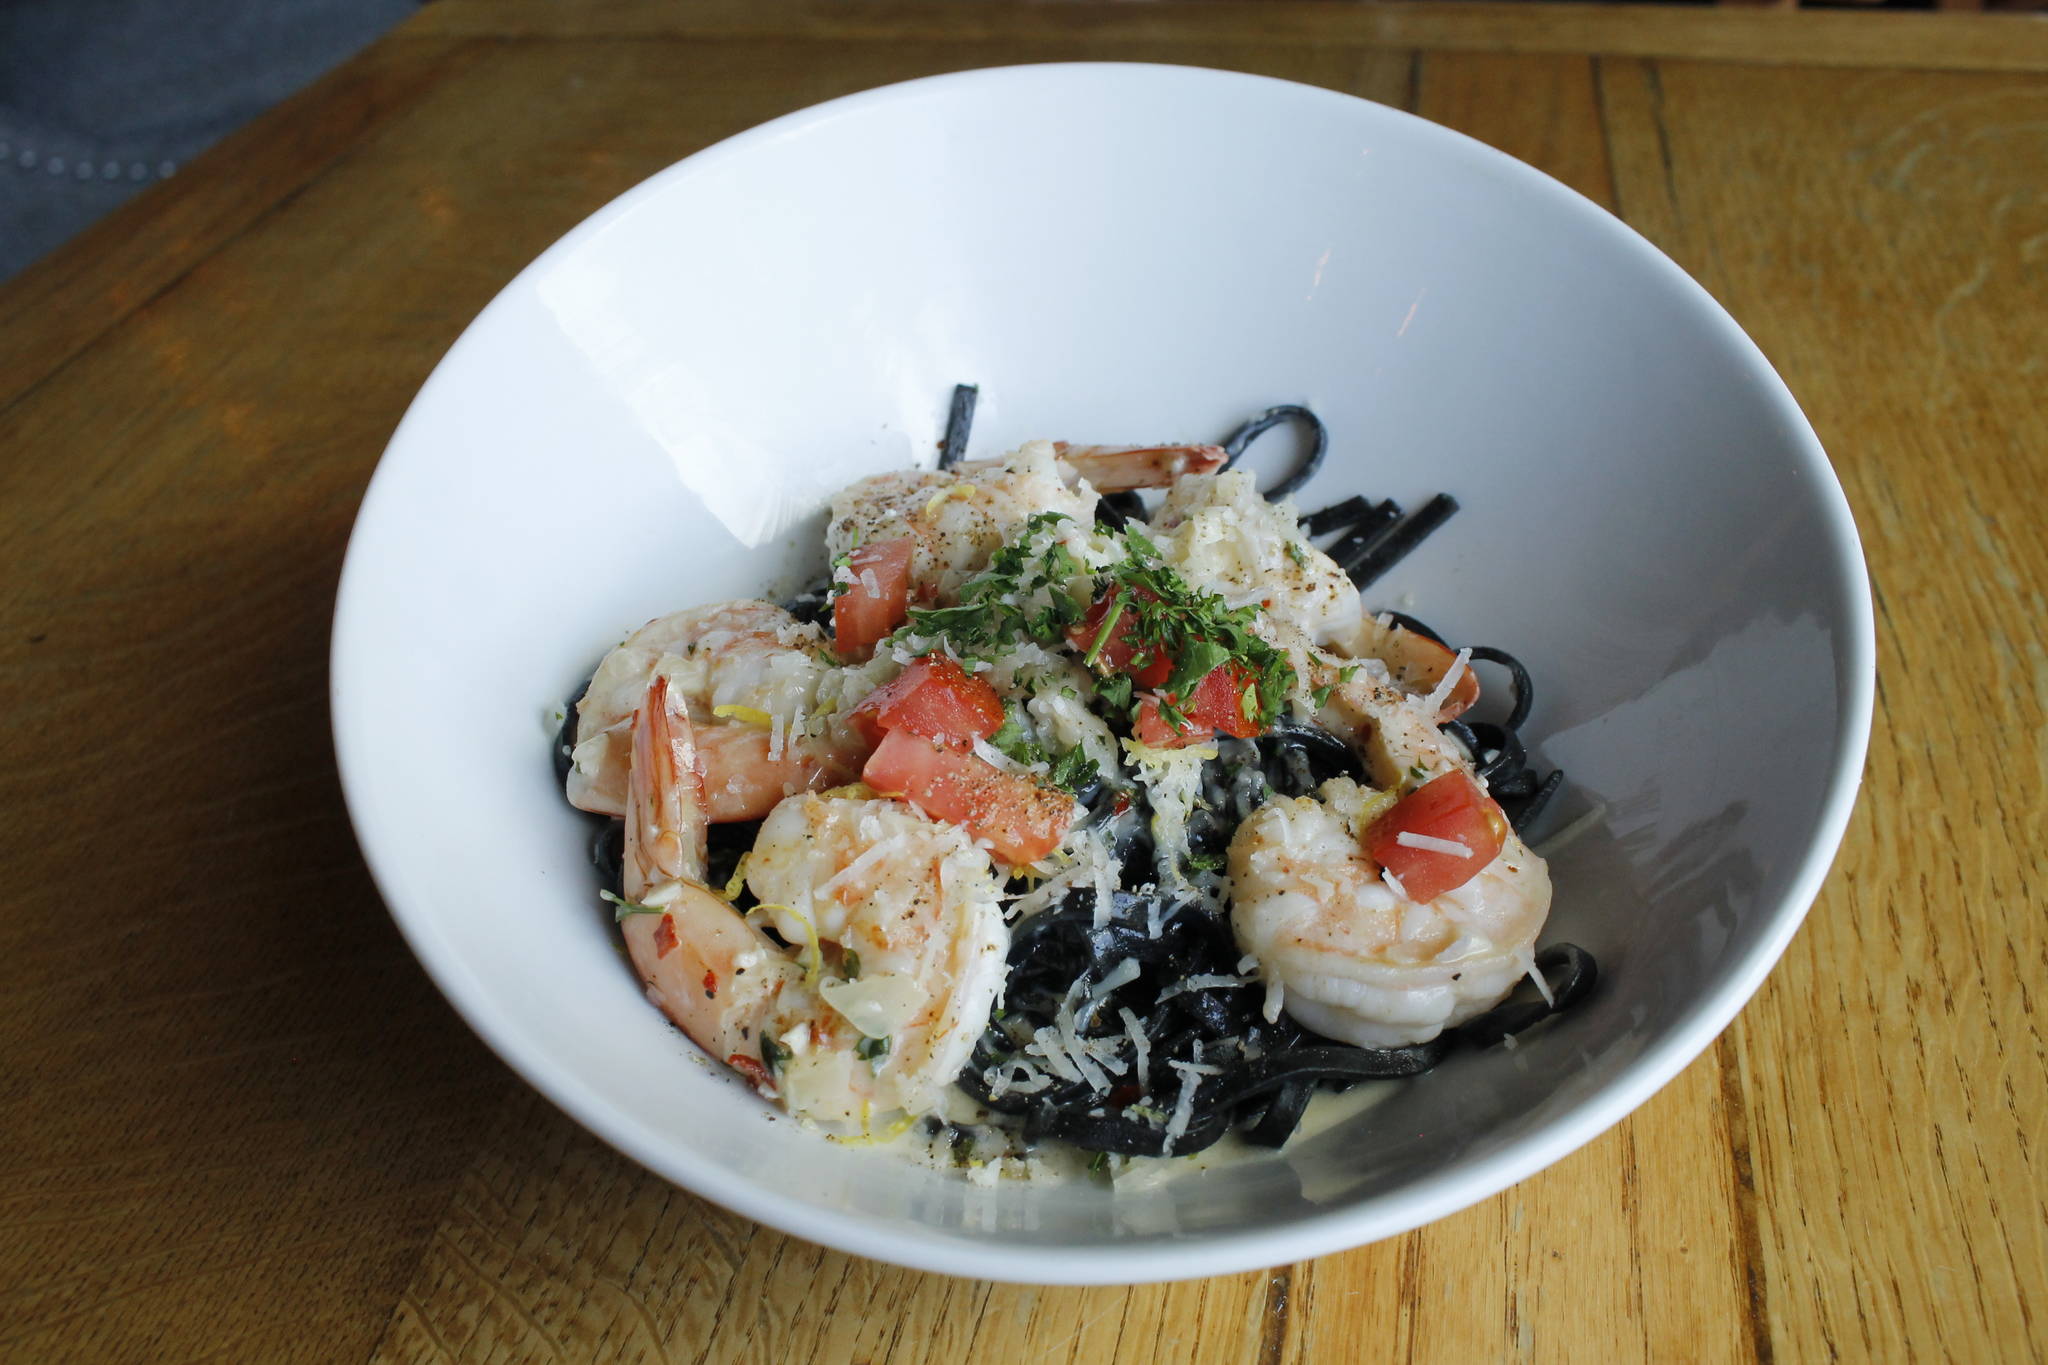 Squid ink linguine — pasta made using actual squid ink — is just one of the “eclectic” dishes on the menu at Savory. (Photo by Kira Erickson/South Whidbey Record)